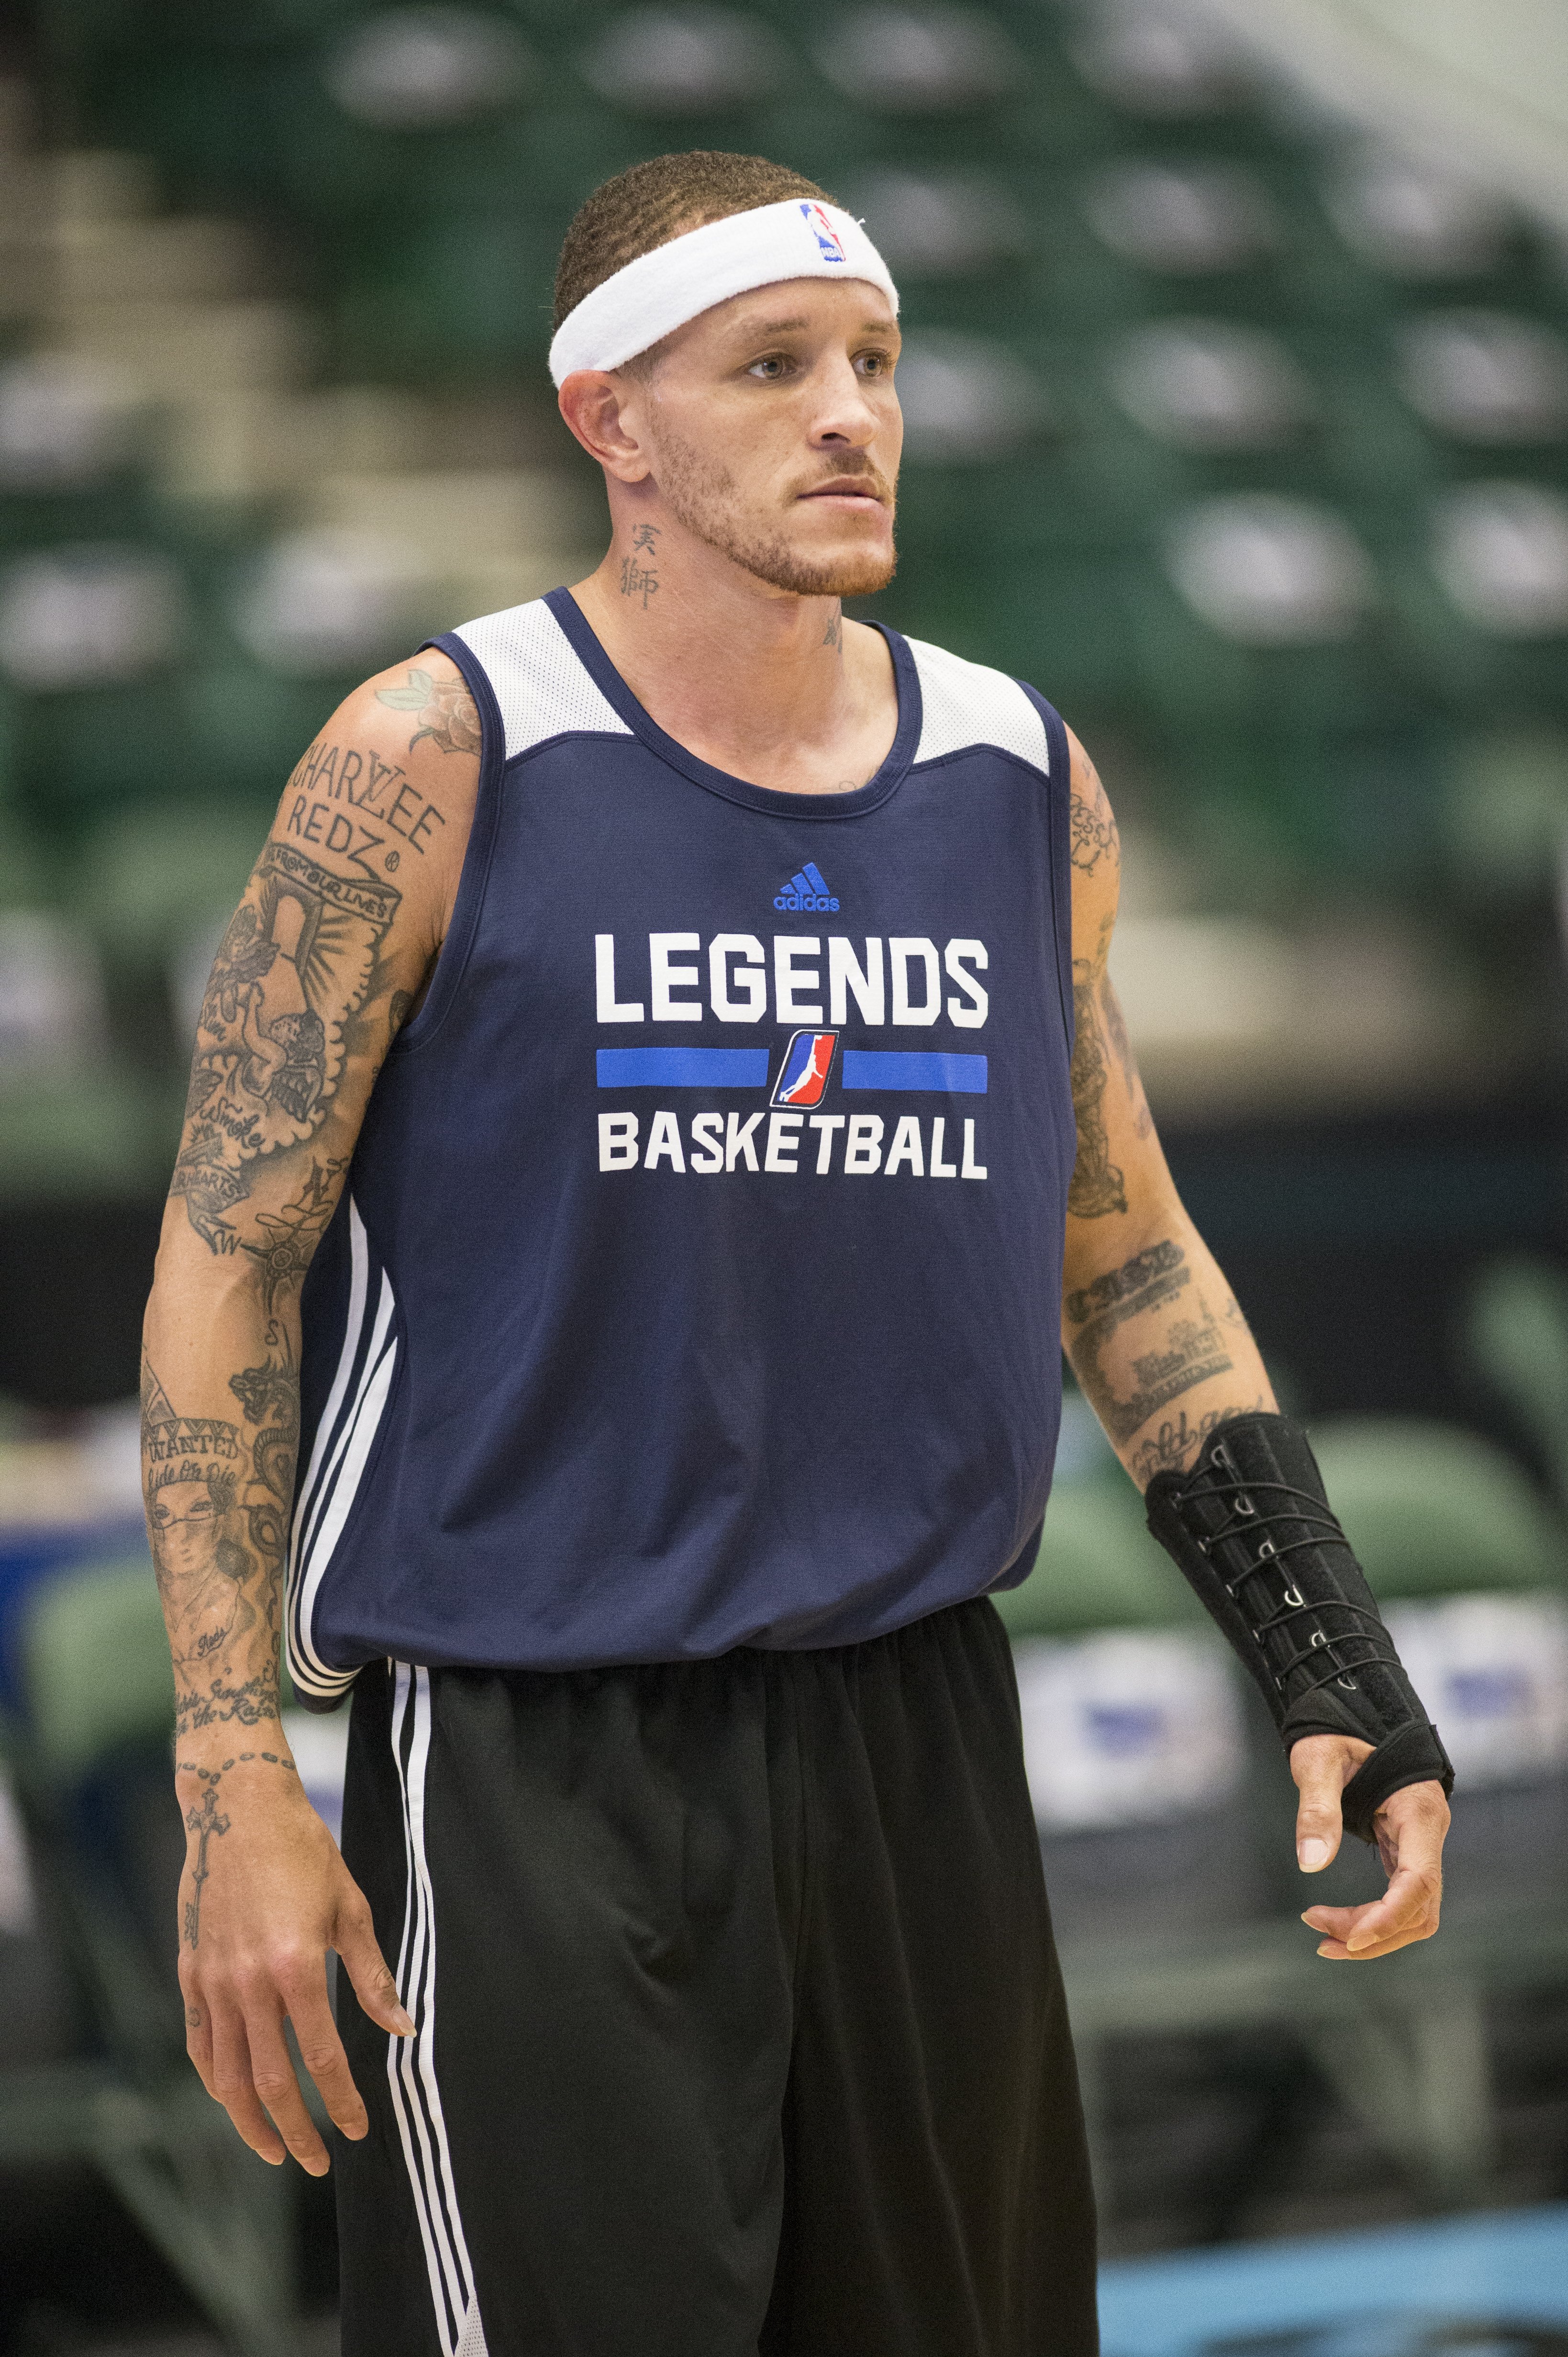 Delonte West on the court during a solo pre-game workout at the Dr. Pepper Arena on April 1, 2015, in Frisco, Texas | Photo: Michael Mulvey for The Washington Post/Getty Images